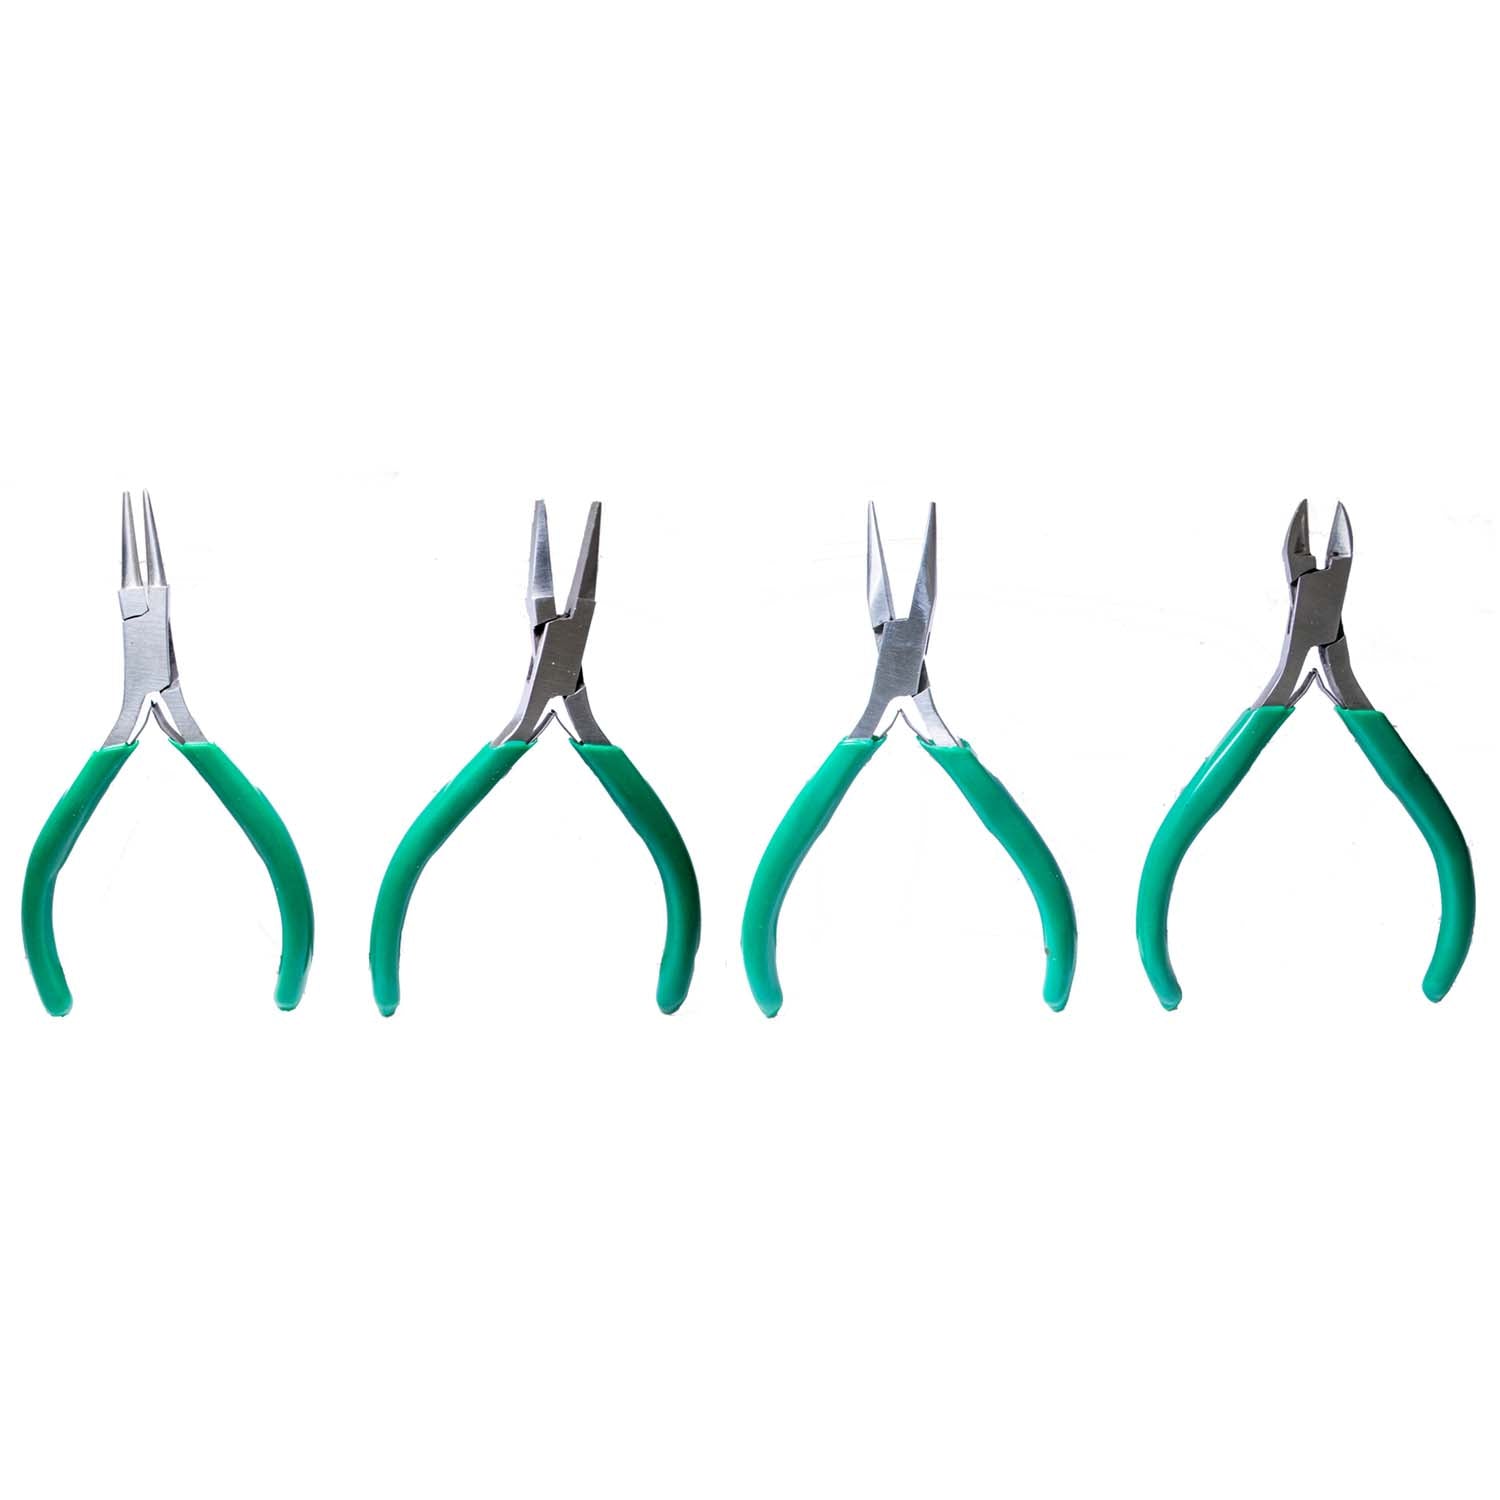 Tool set - pliers and cutters